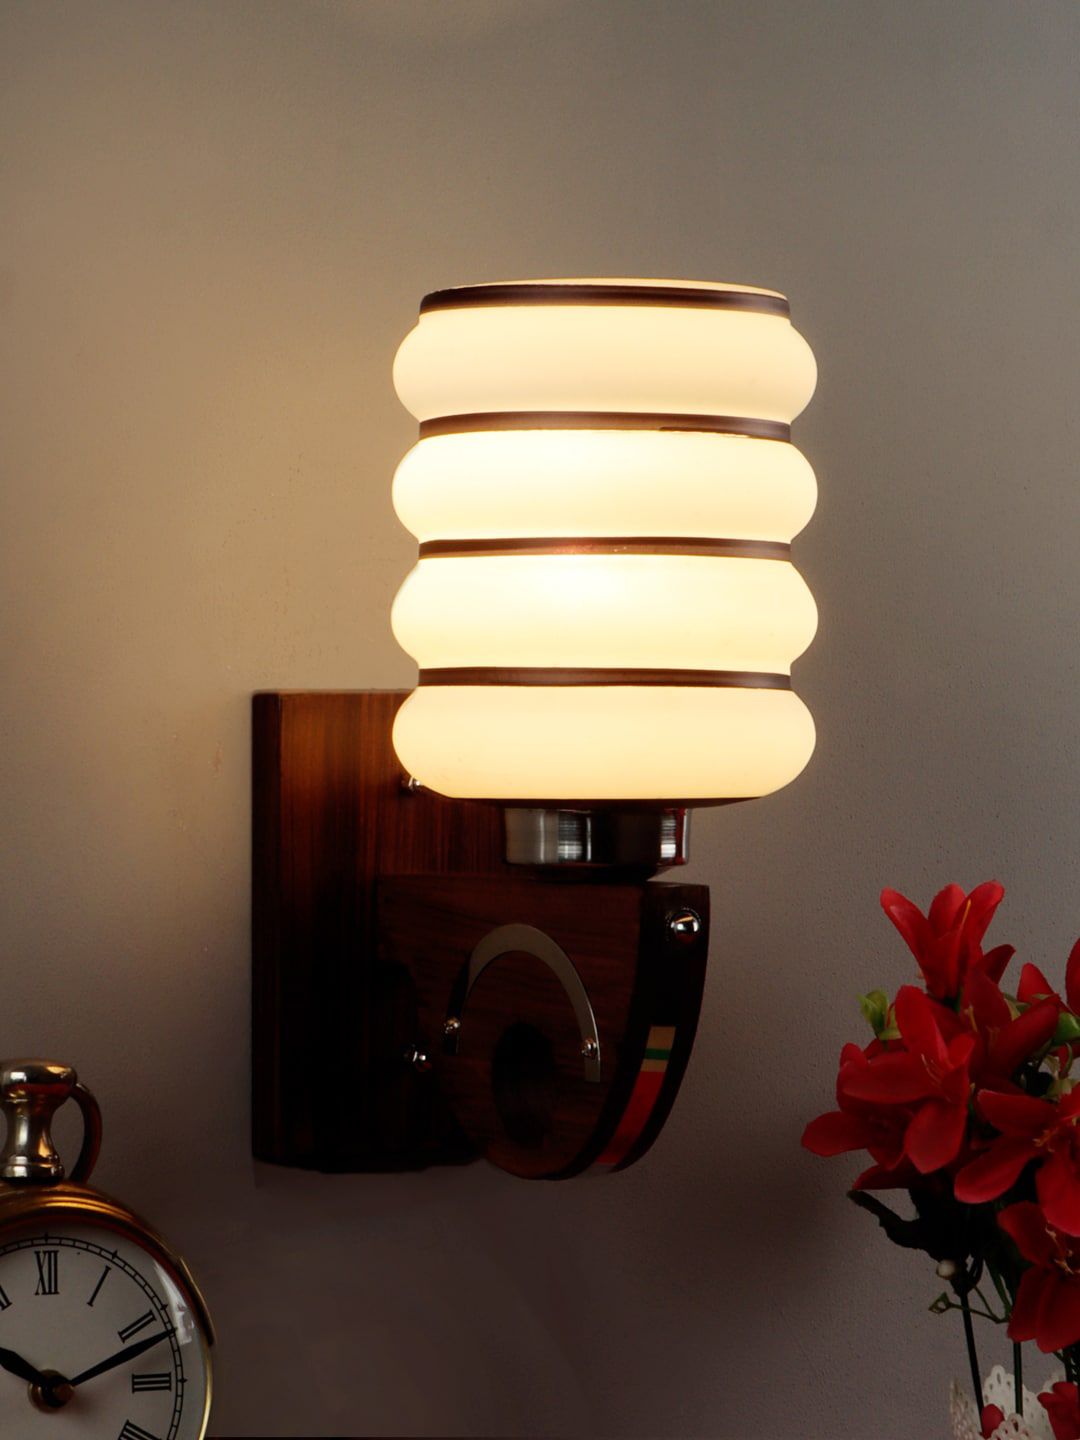 Foziq Wooden Side Wall Lamps Price in India